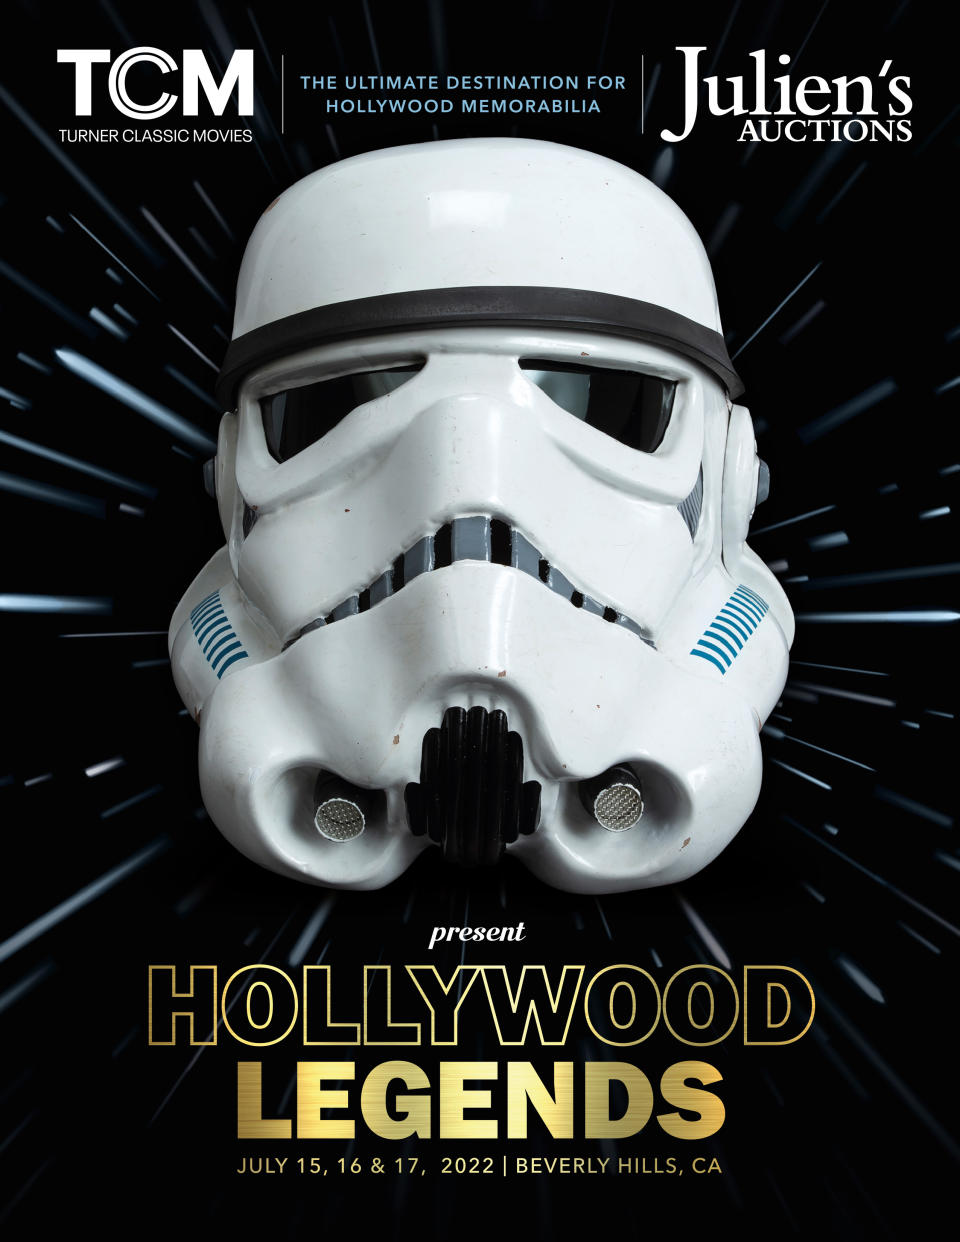 A catalogue cover of the Hollywood Legends sale showing an original Stormtrooper helmet from Star Wars Episode IV: A New Hope. - Credit: Julien's Auctions